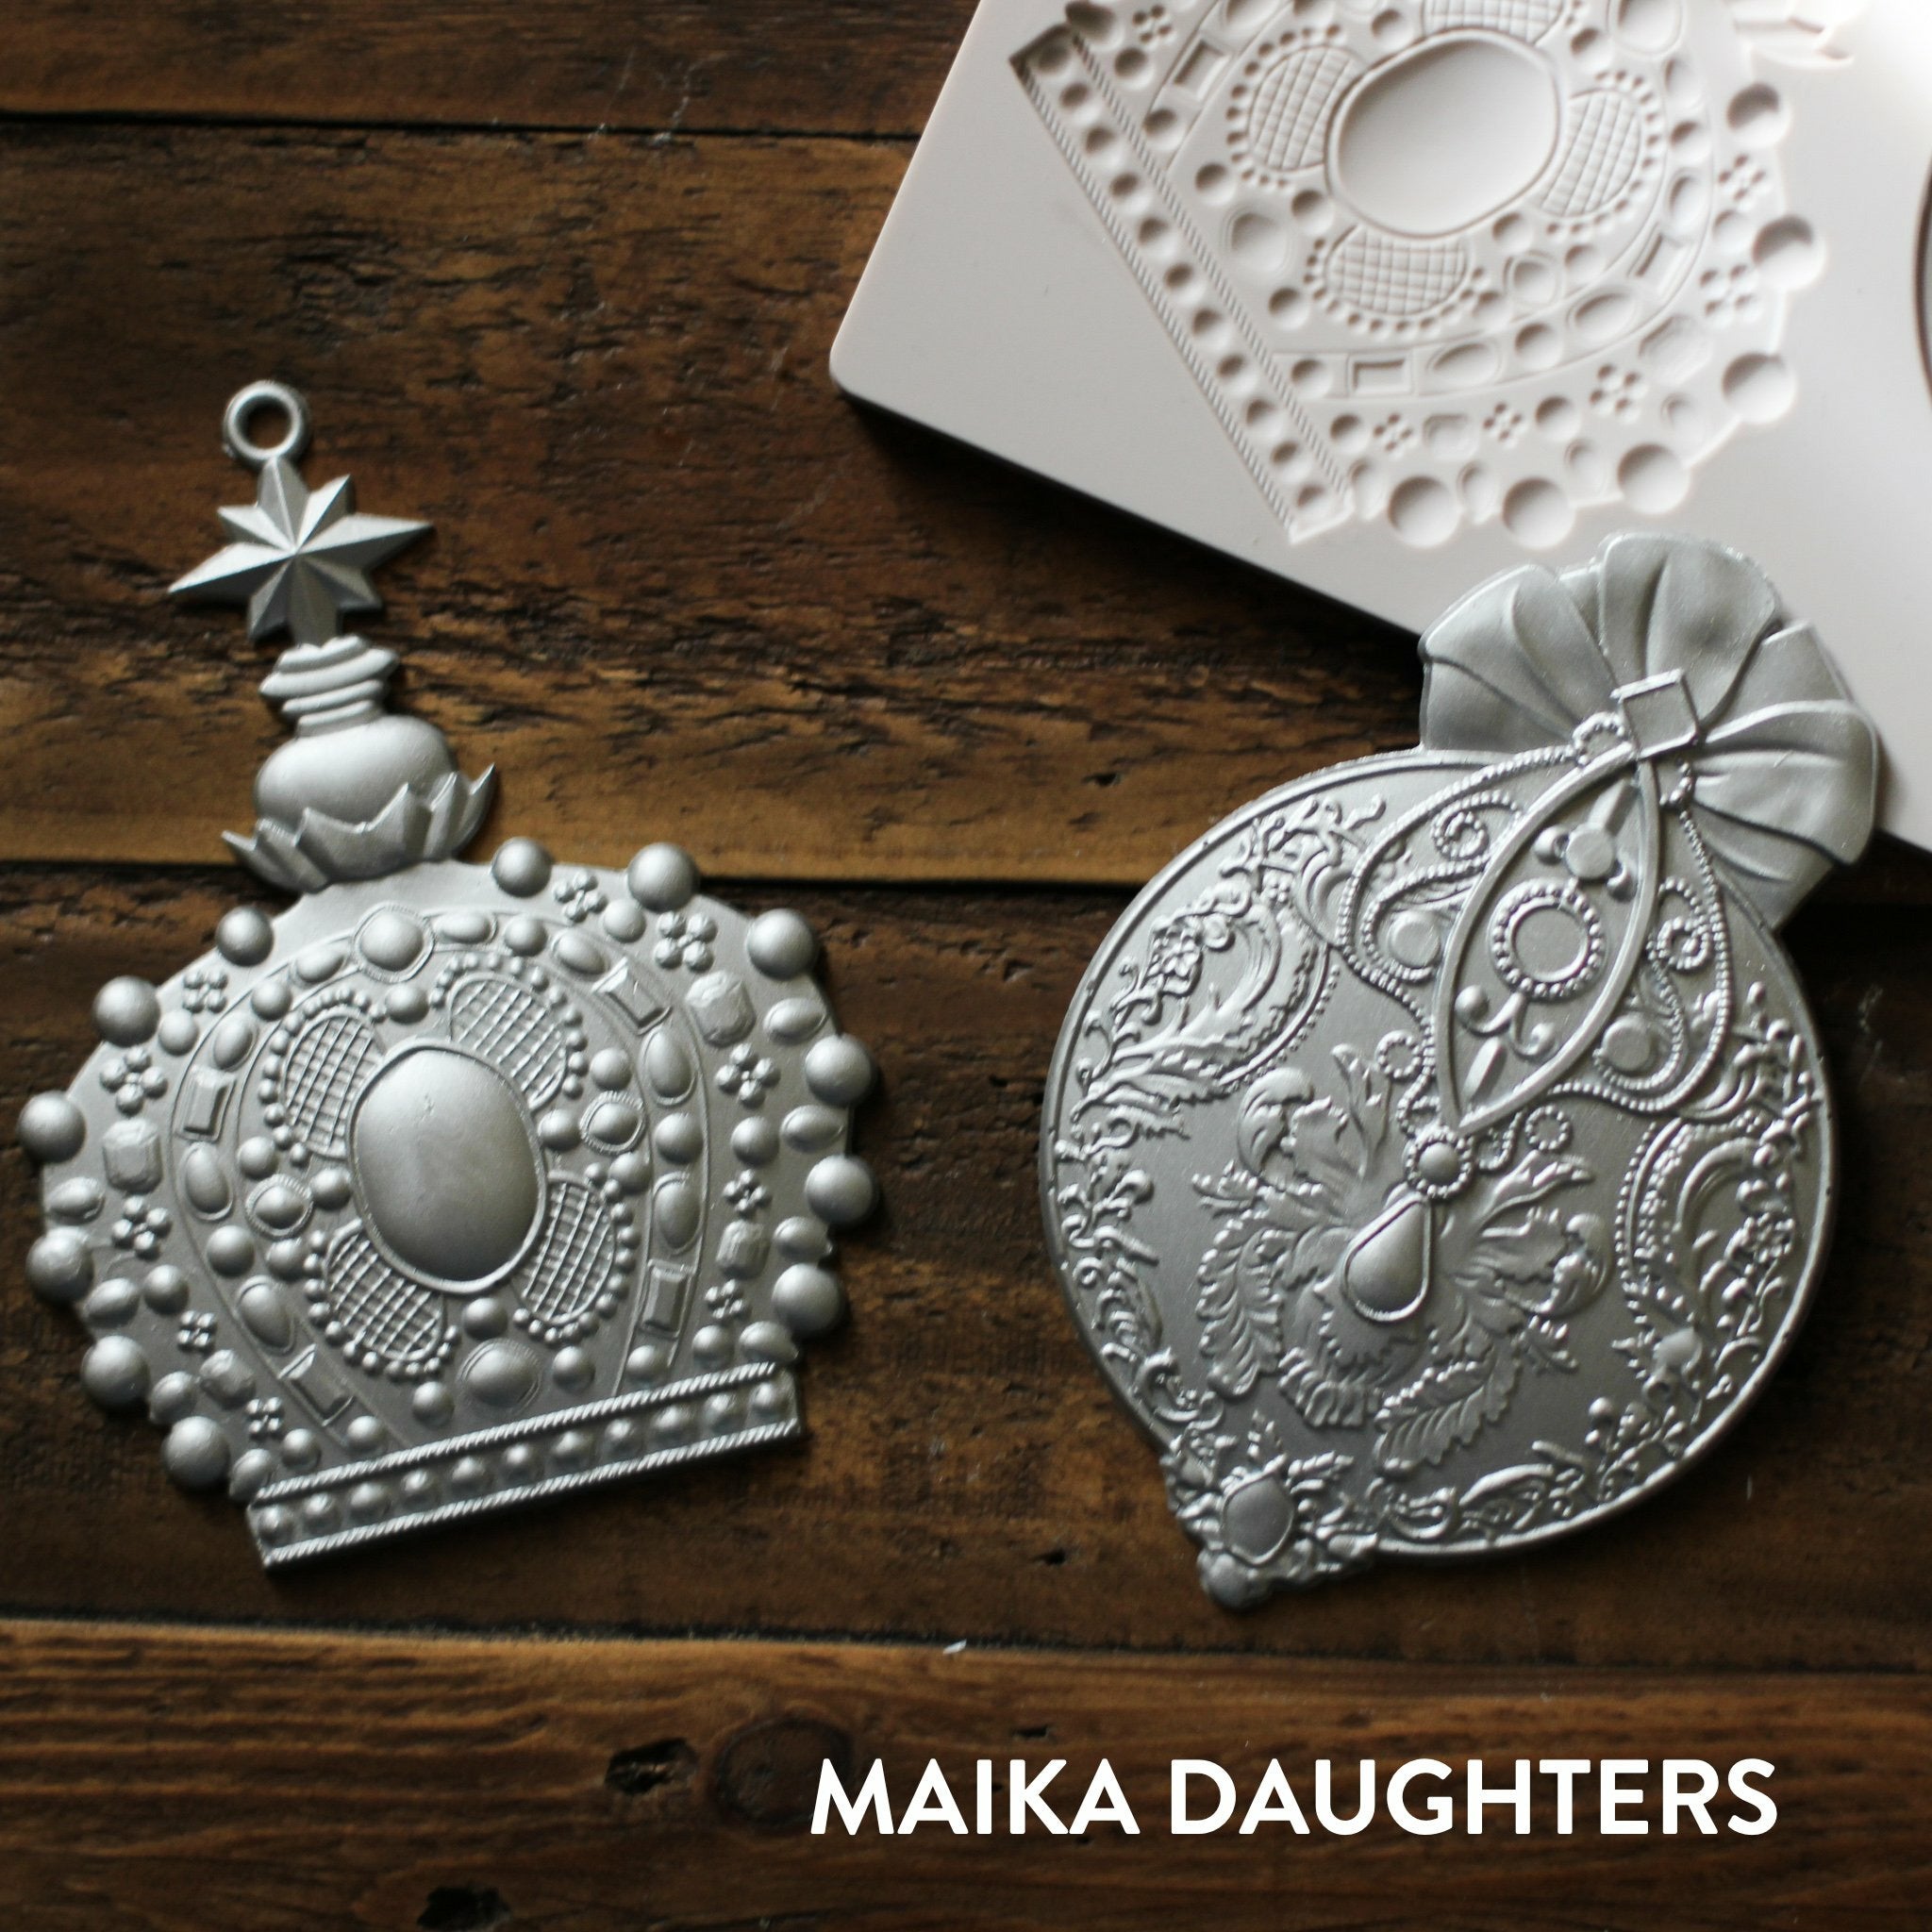 Wooden background with the victorian adornments castings painted in a metallic silver. A white Maika Daughters logo is sat in the bottom right corner.